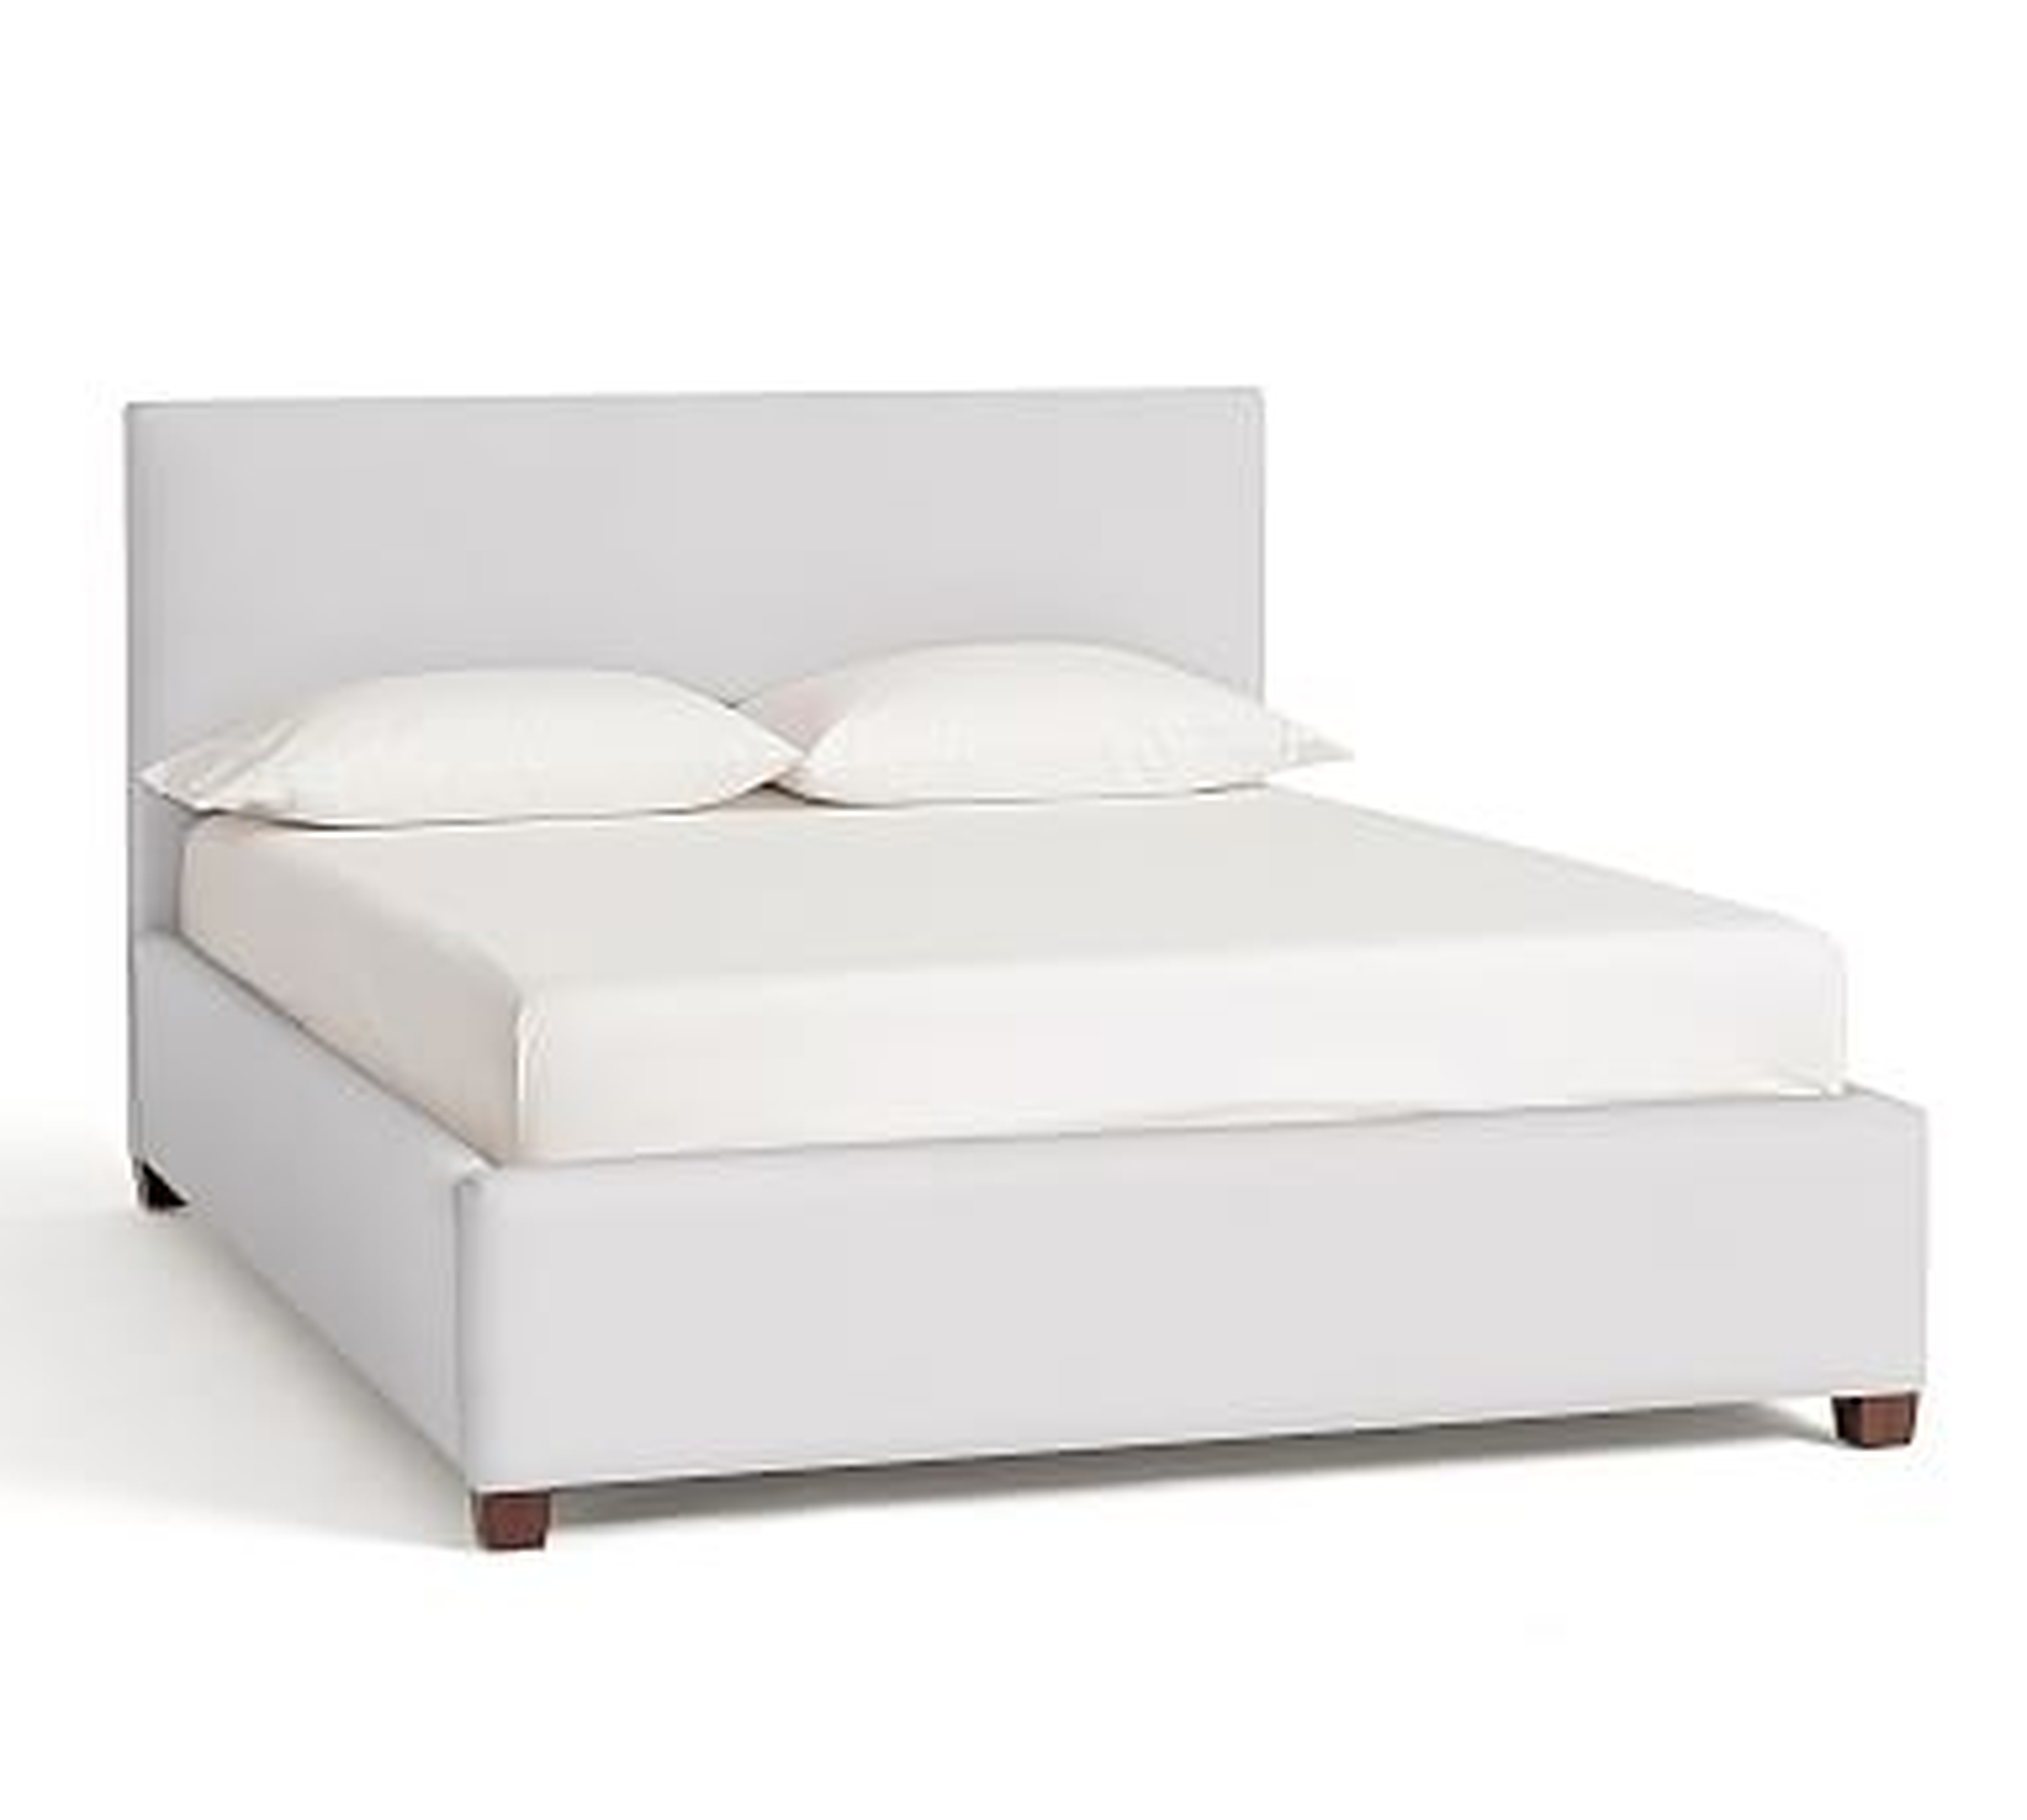 Raleigh Upholstered Square Queen Bed with Low Headboard, without Nailheads, Twill White - Pottery Barn